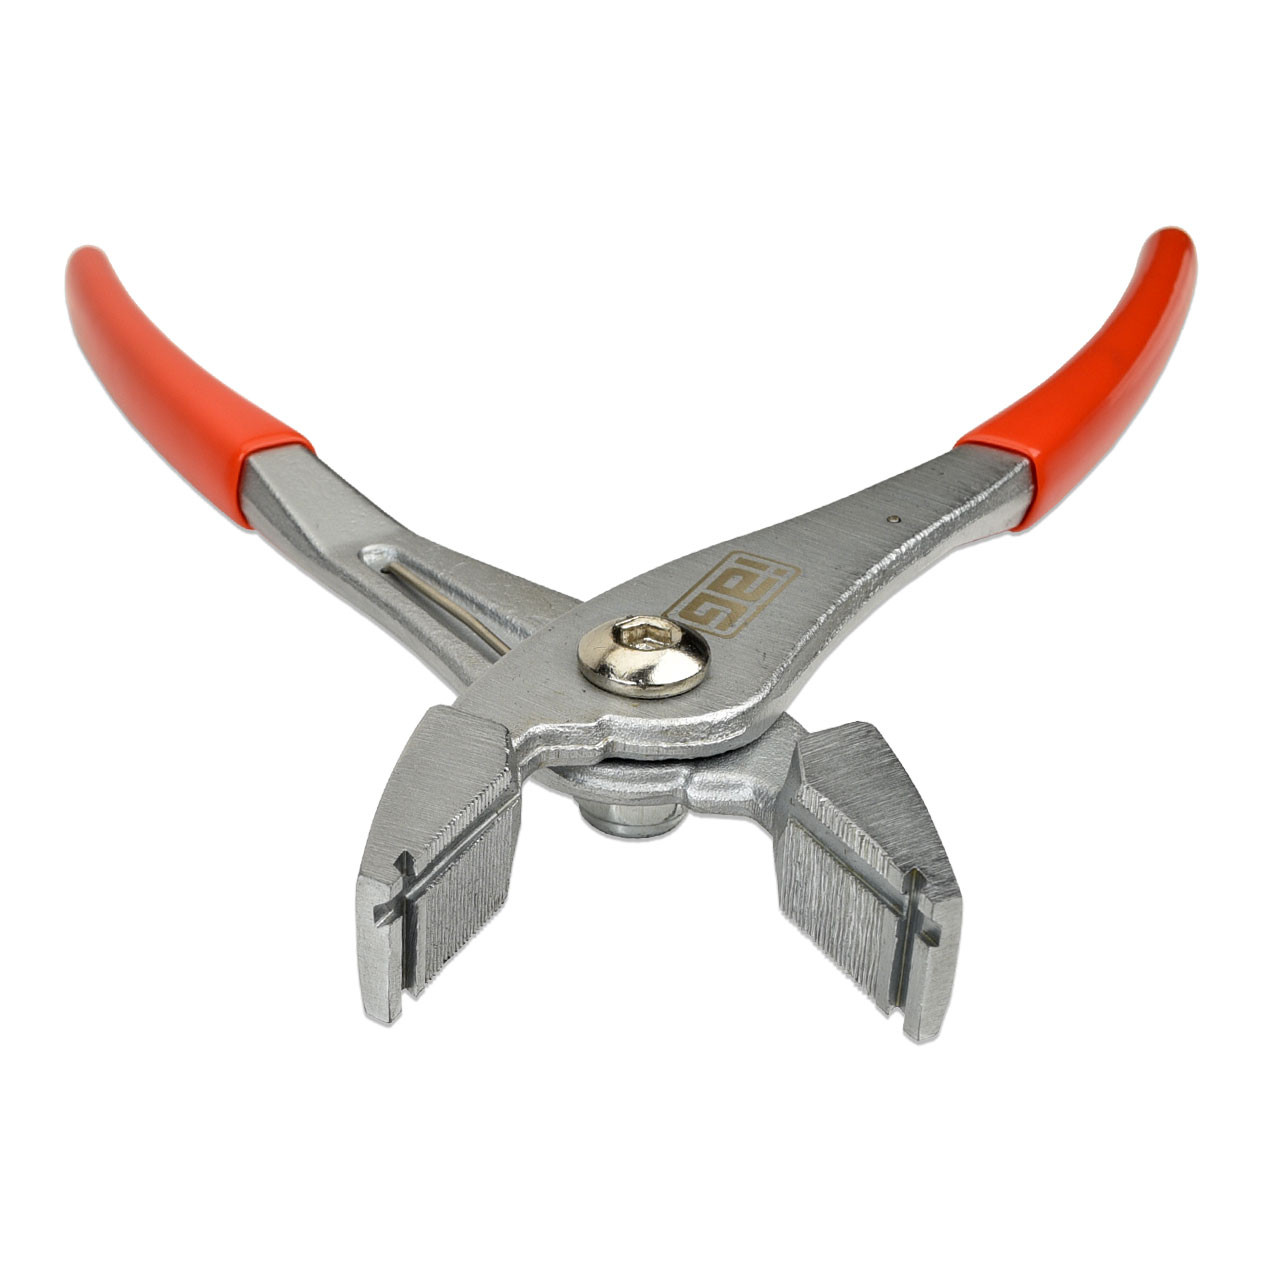 IAG Multi-Directional Hose Clamp Pliers - Jaws 2